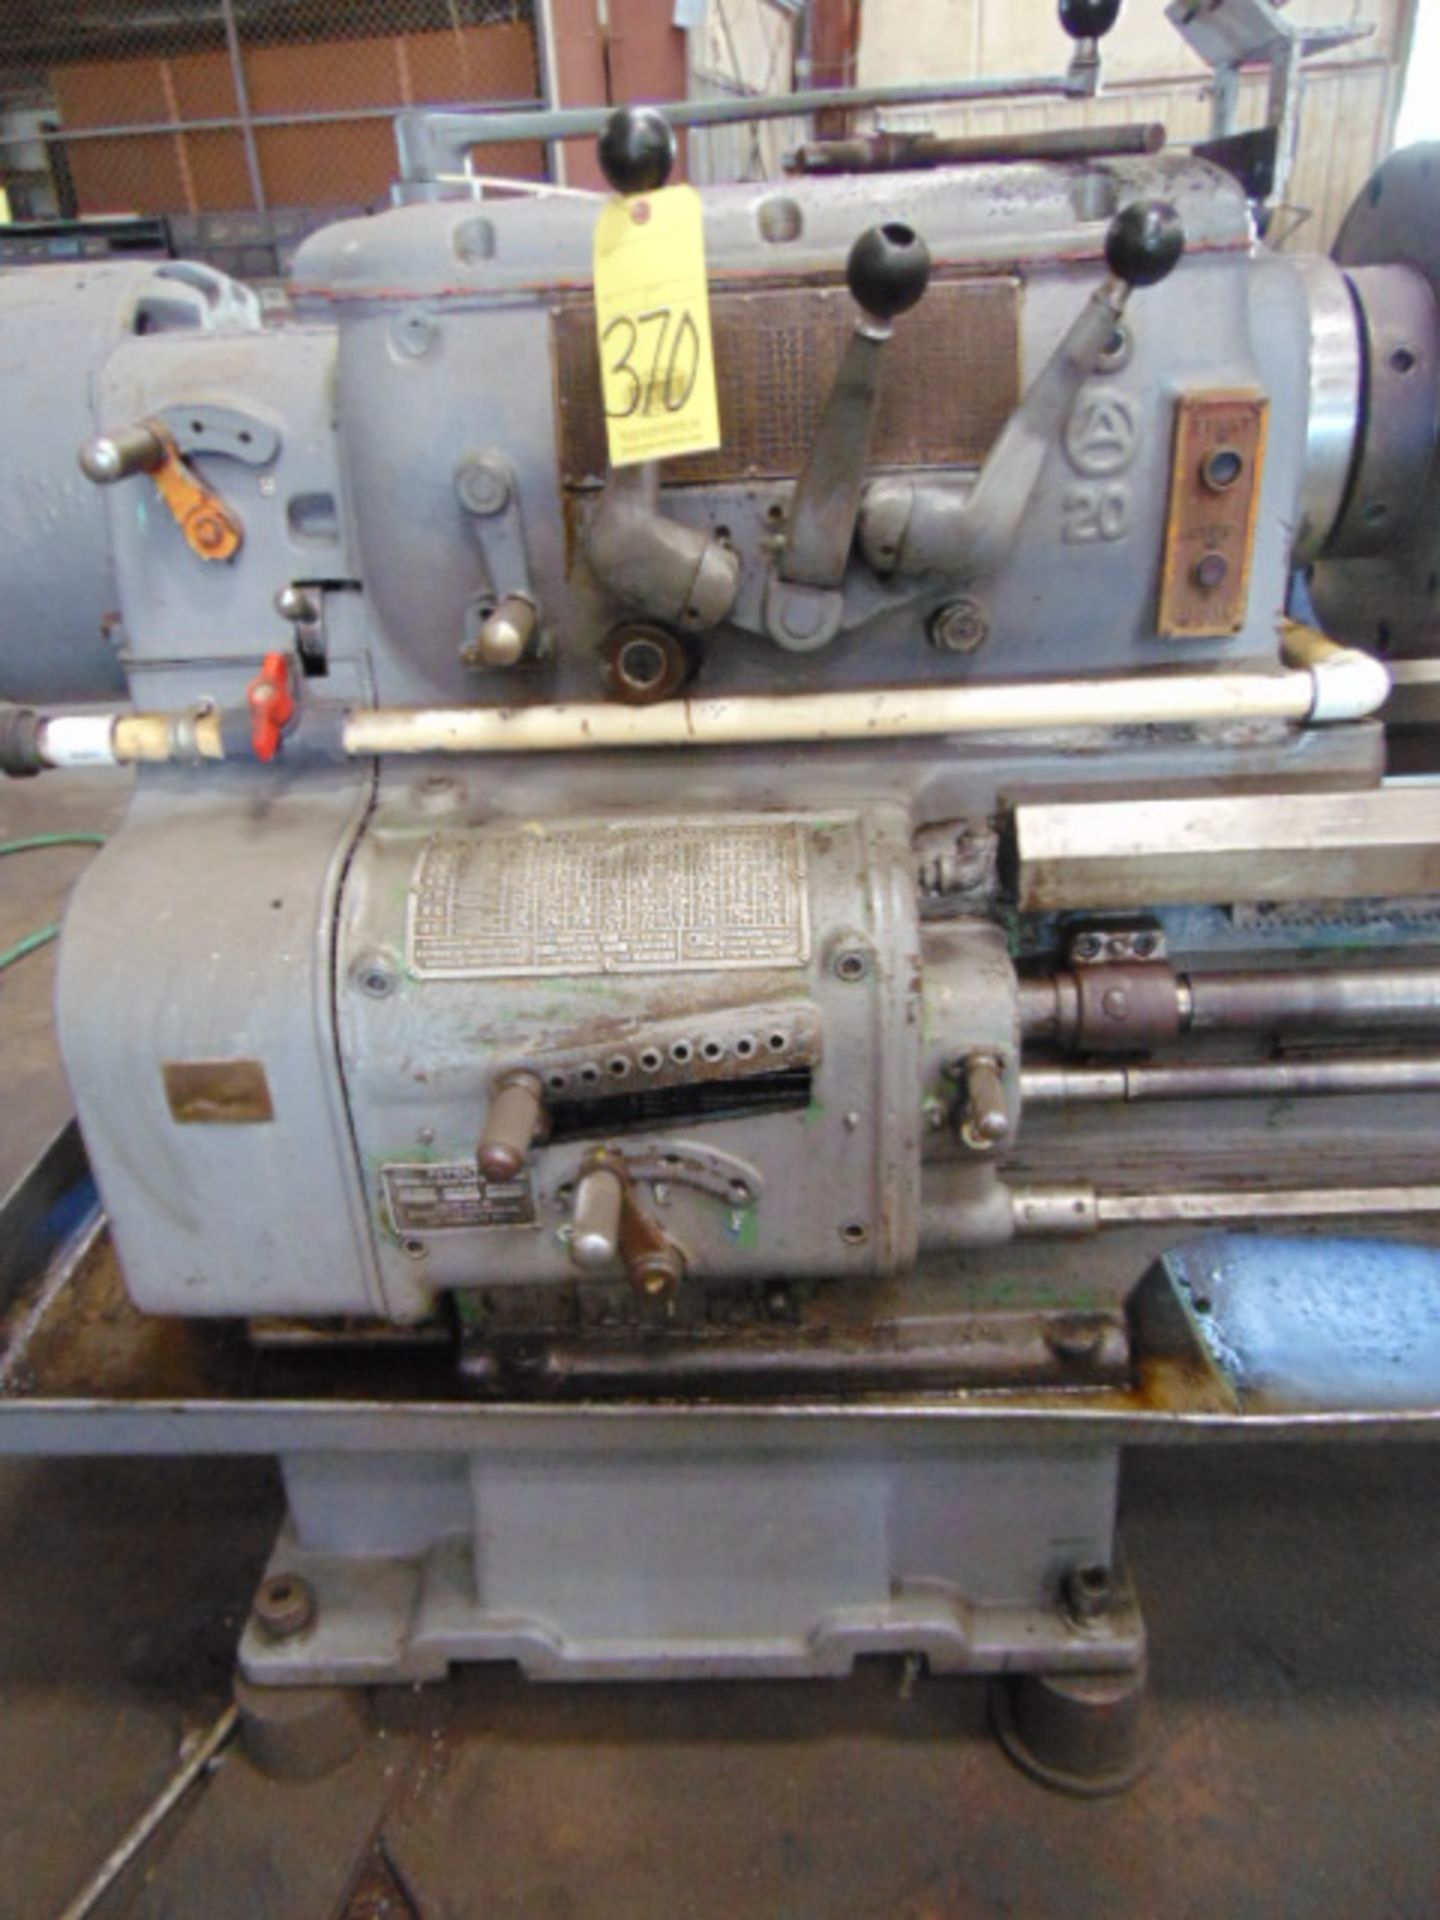 ENGINE LATHE, AXELSON SIZE 2516, 25” max. swing, 120” centers, spdl. spds: 9.5-961 RPM, 2-1/2” spdl. - Image 2 of 10